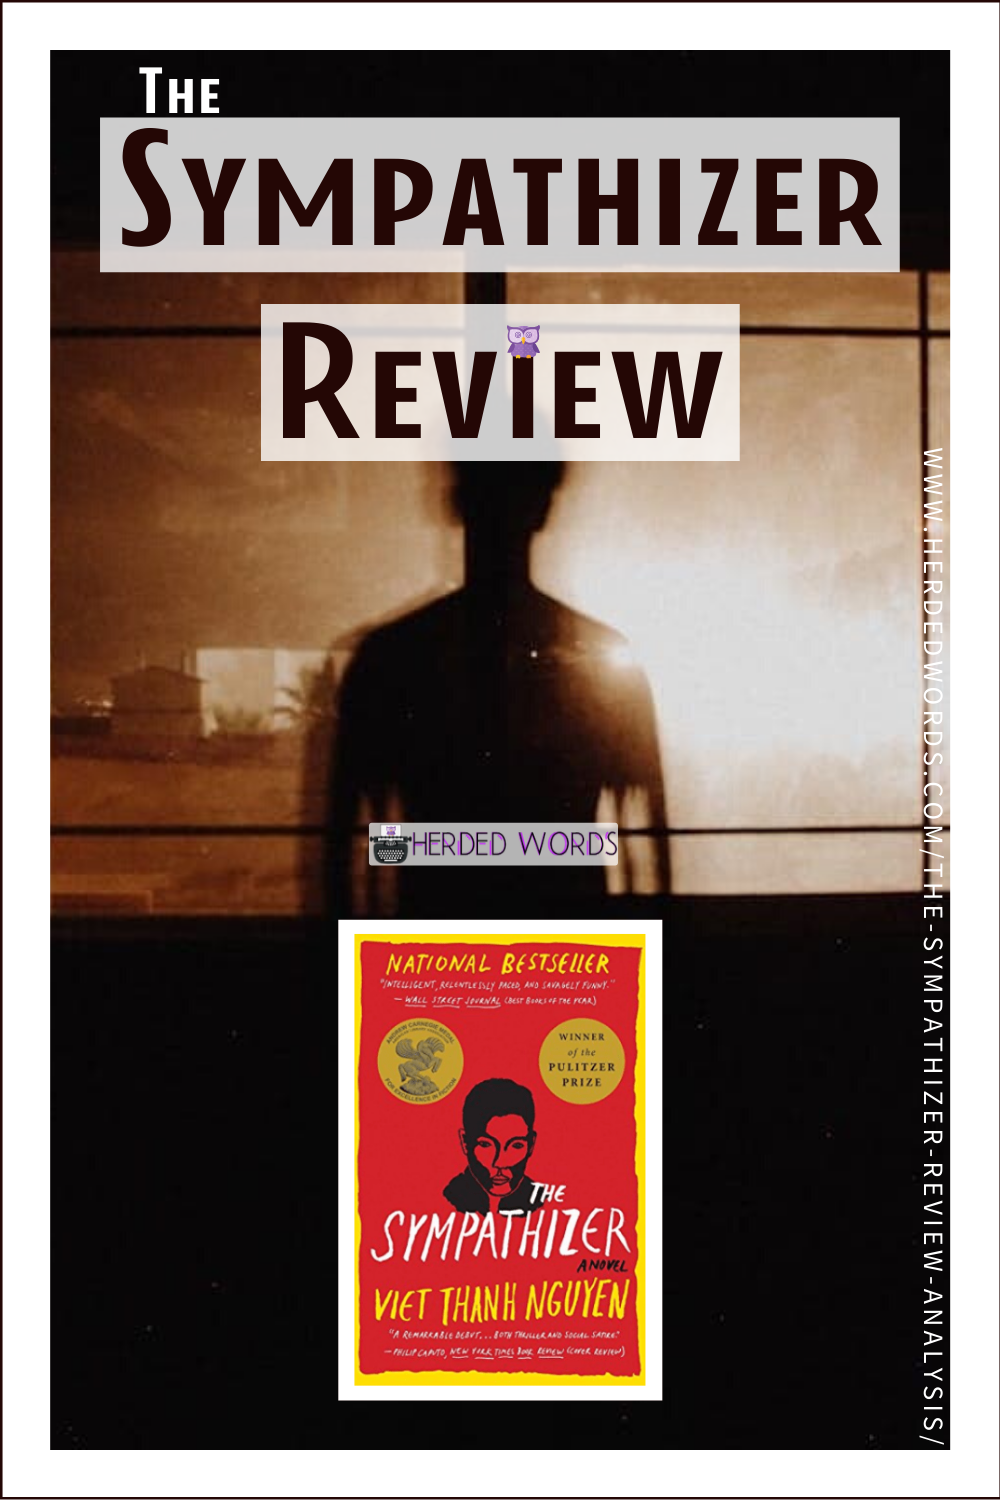 Pin This: Book Review & Analysis of THE SYMPATHIZER